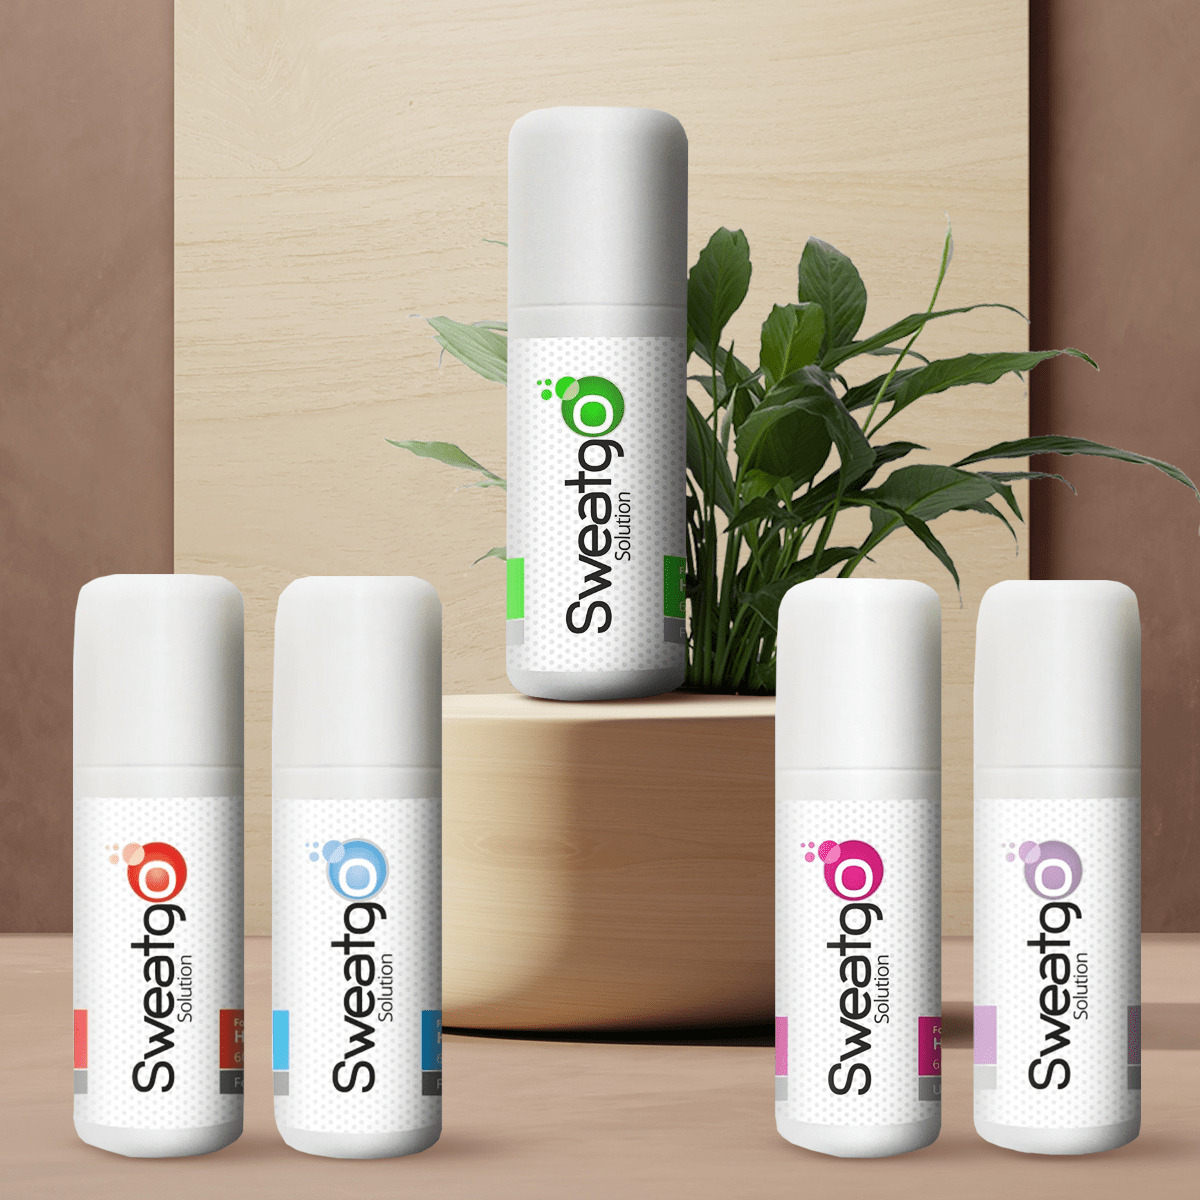 Sweatgo Deodorant,Gift Sets Copy of Sweat Go Smell Fresh & Smell Different Everyday Couples